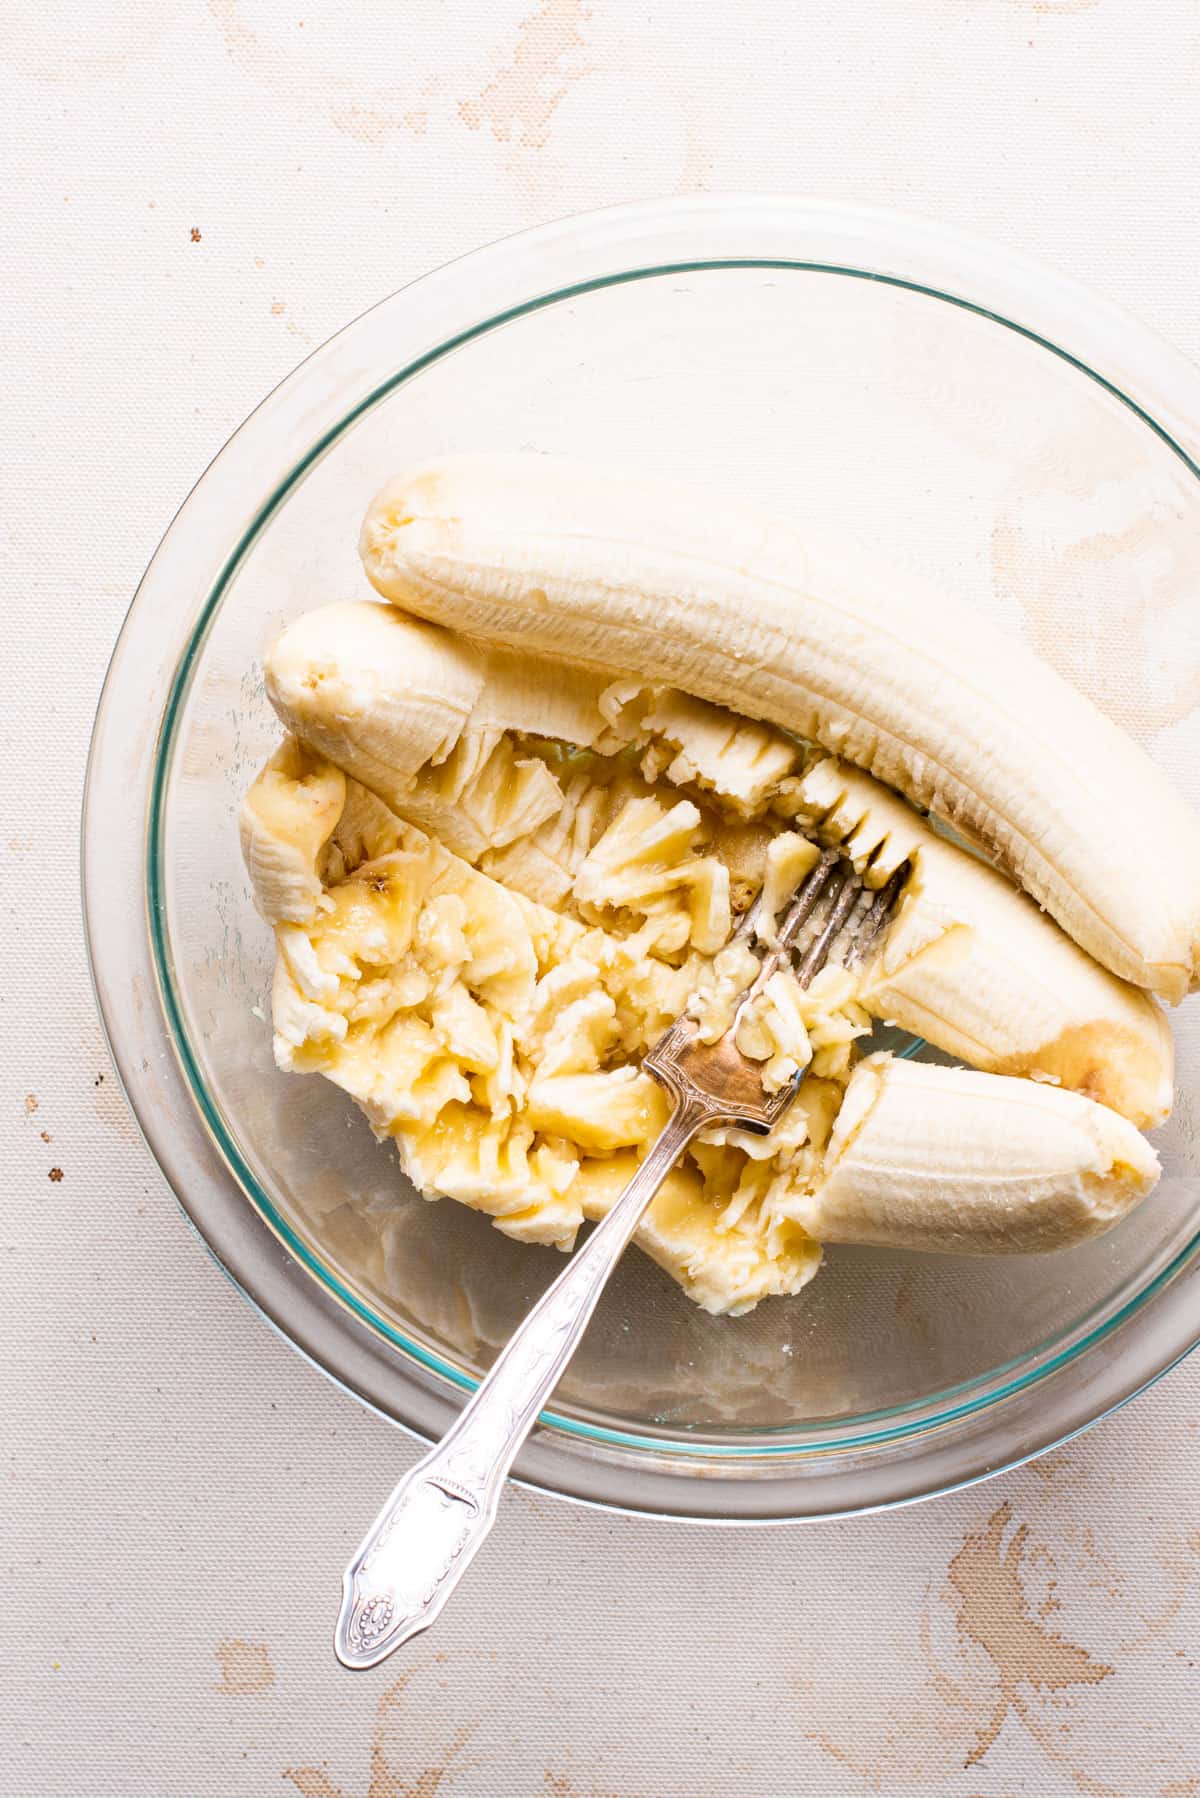 Bananas mashed in a bowl with a fork.